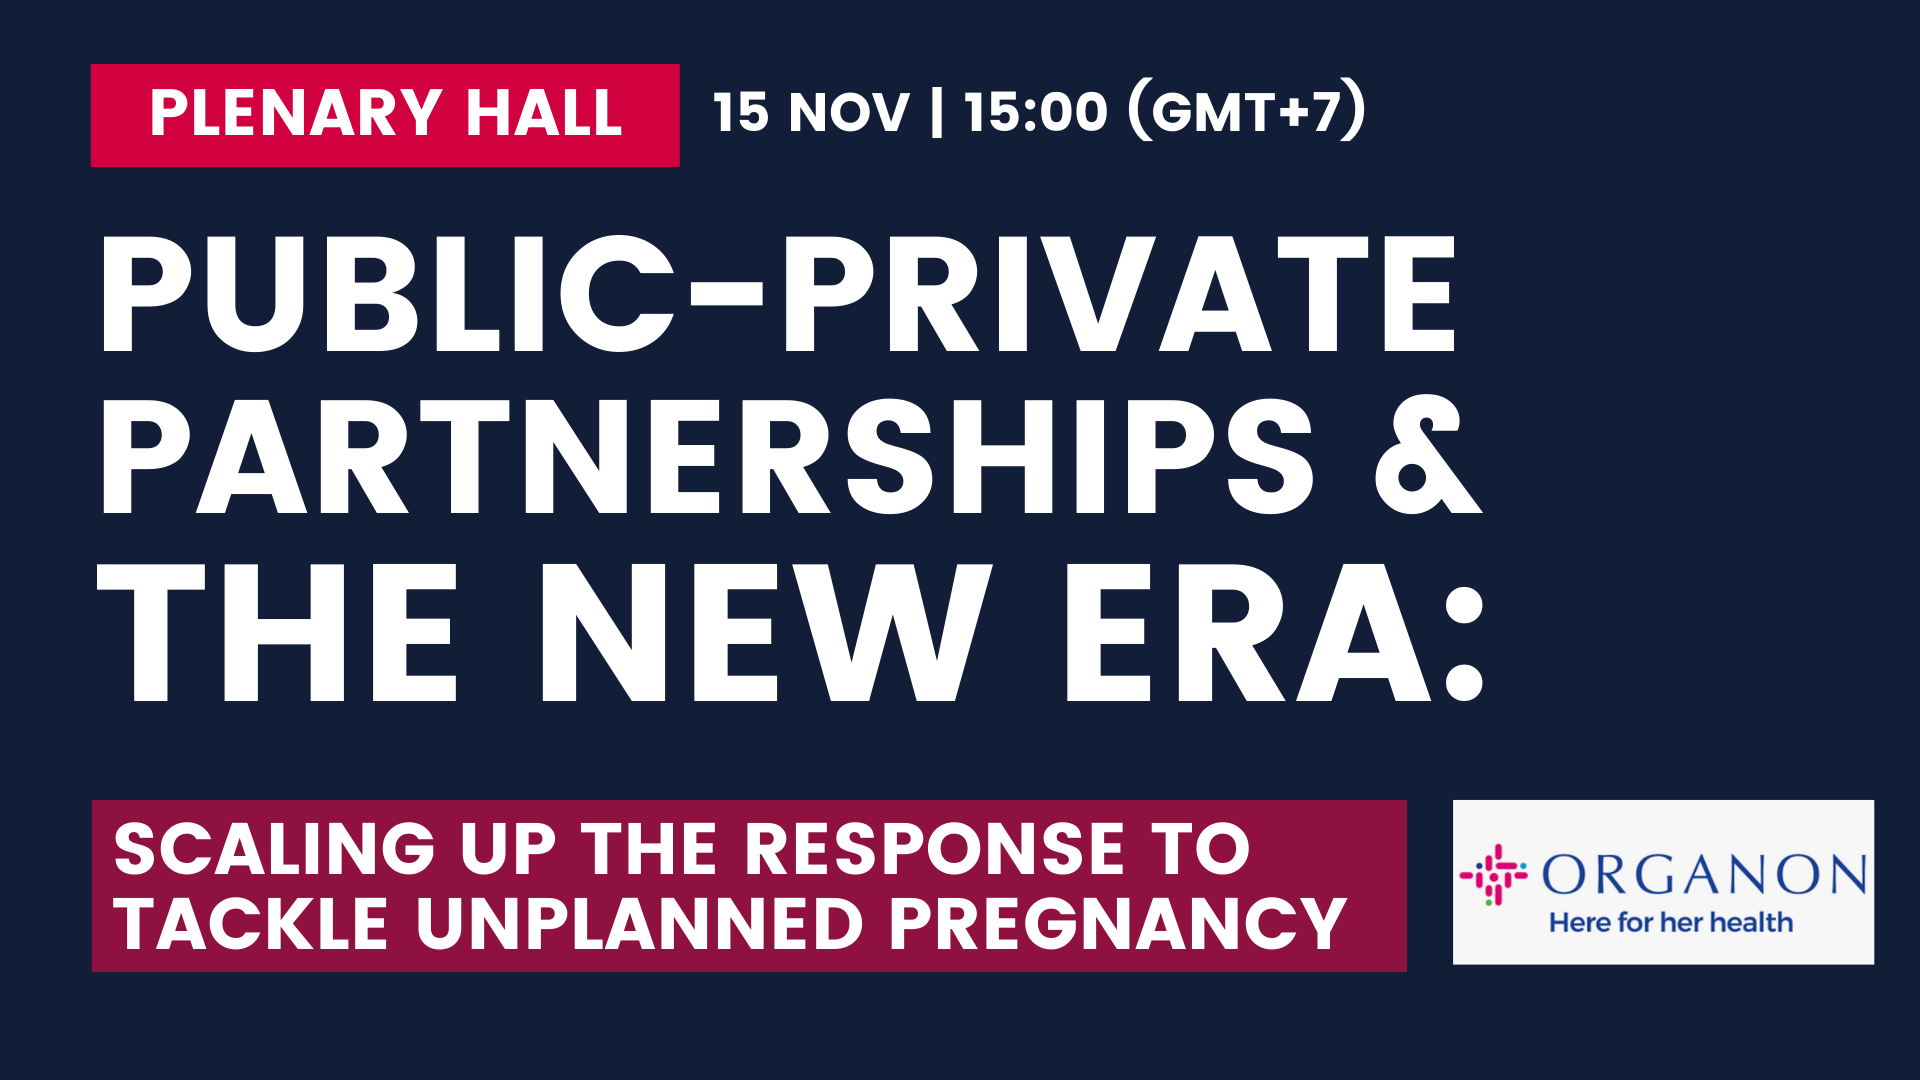 Public-private partnerships & the new era: Scaling up the response to tackle unplanned pregnancy